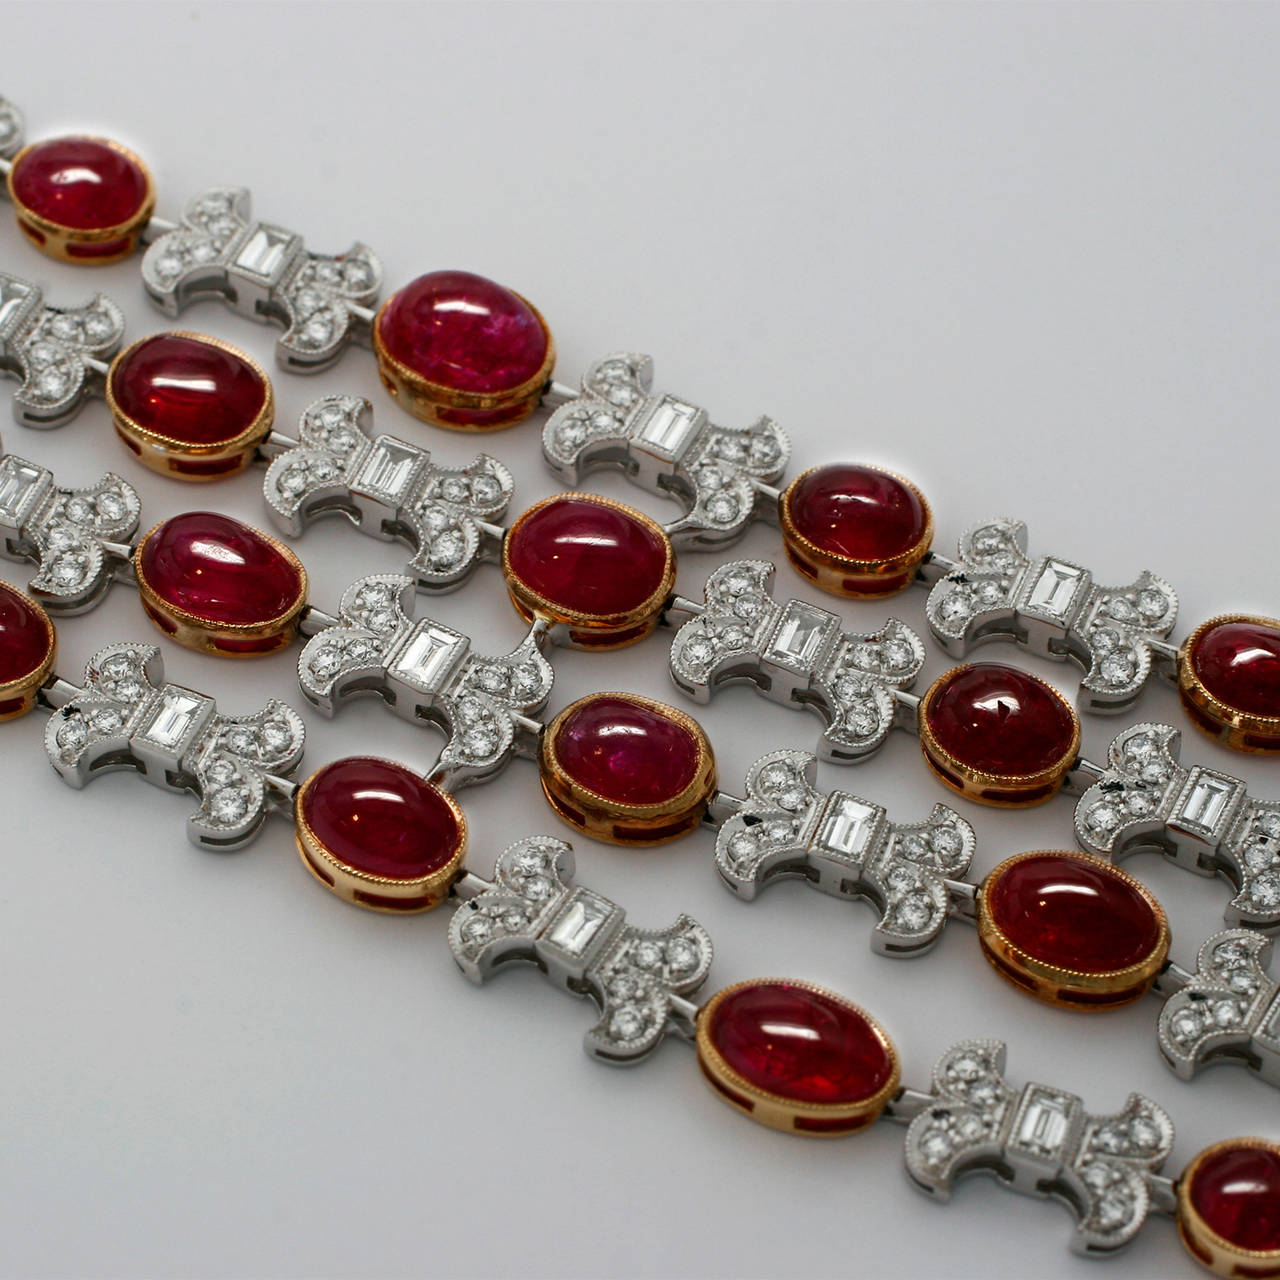 Platinum and 18k Yellow Gold Bracelet with an Amazing Collection of Matching  Cabuchon Burma Rubies (36r=44.16ctw) with Beautiful Diamond Bows (288 Round Brilliant Diamonds=3.47ctw and 26 Baguette Diamonds=2.60ctw H/VS) weighing an incredibly light